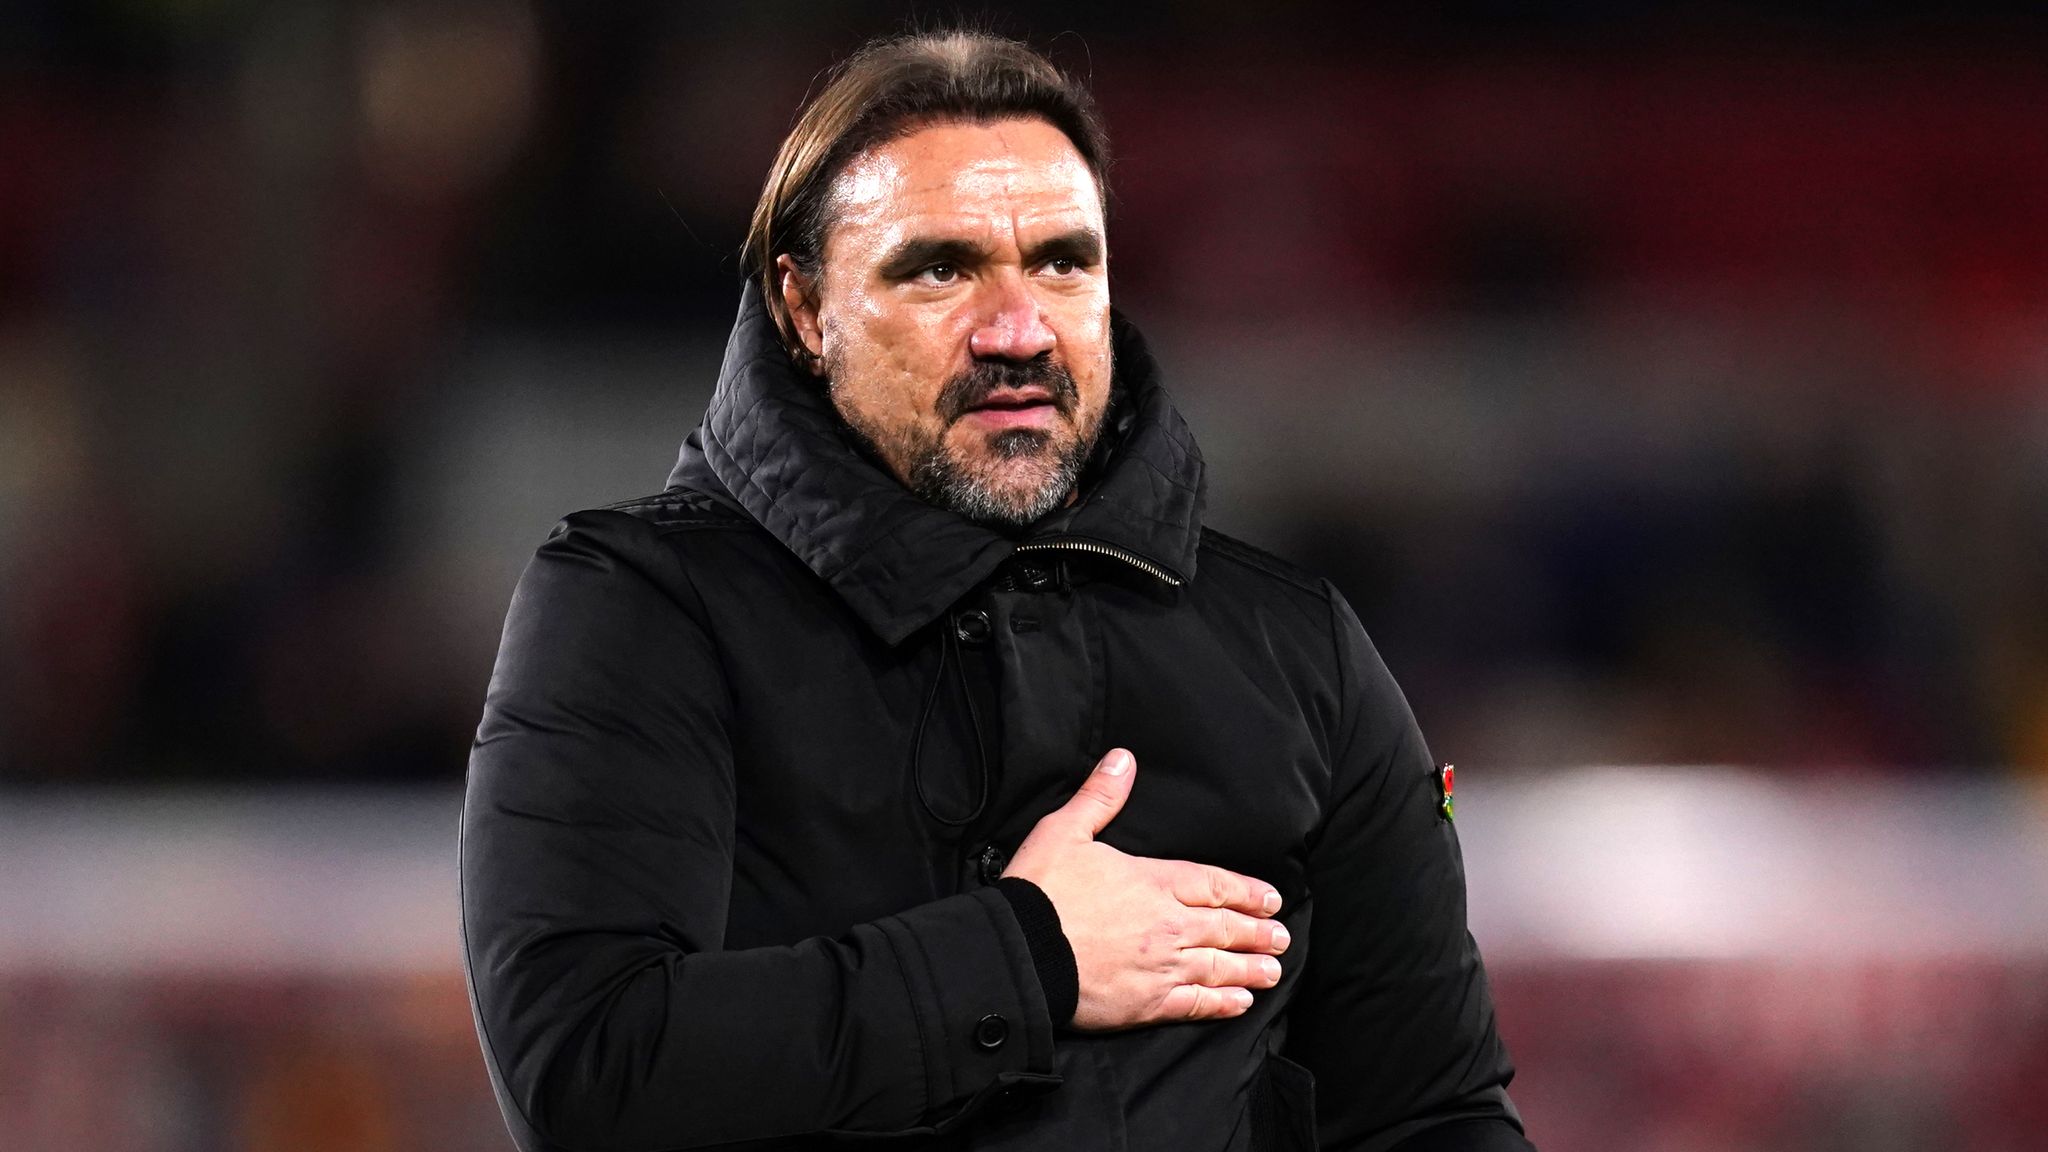 Daniel Farke to Leeds: Former Norwich manager in advanced talks to take  over vacancy at Elland Road | Football News | Sky Sports